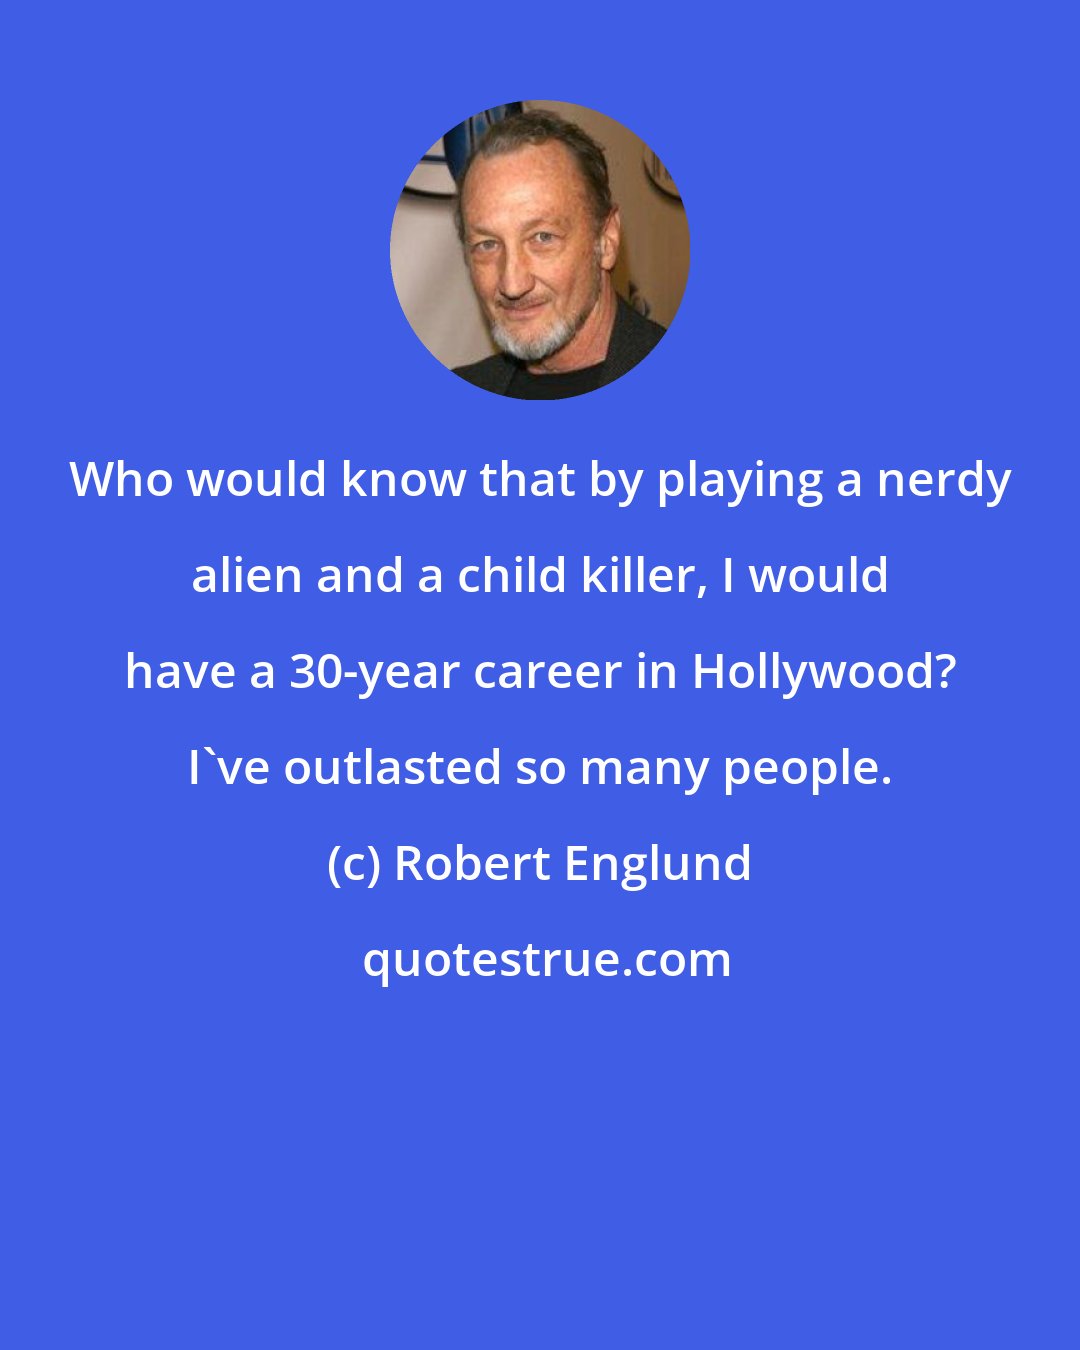 Robert Englund: Who would know that by playing a nerdy alien and a child killer, I would have a 30-year career in Hollywood? I've outlasted so many people.